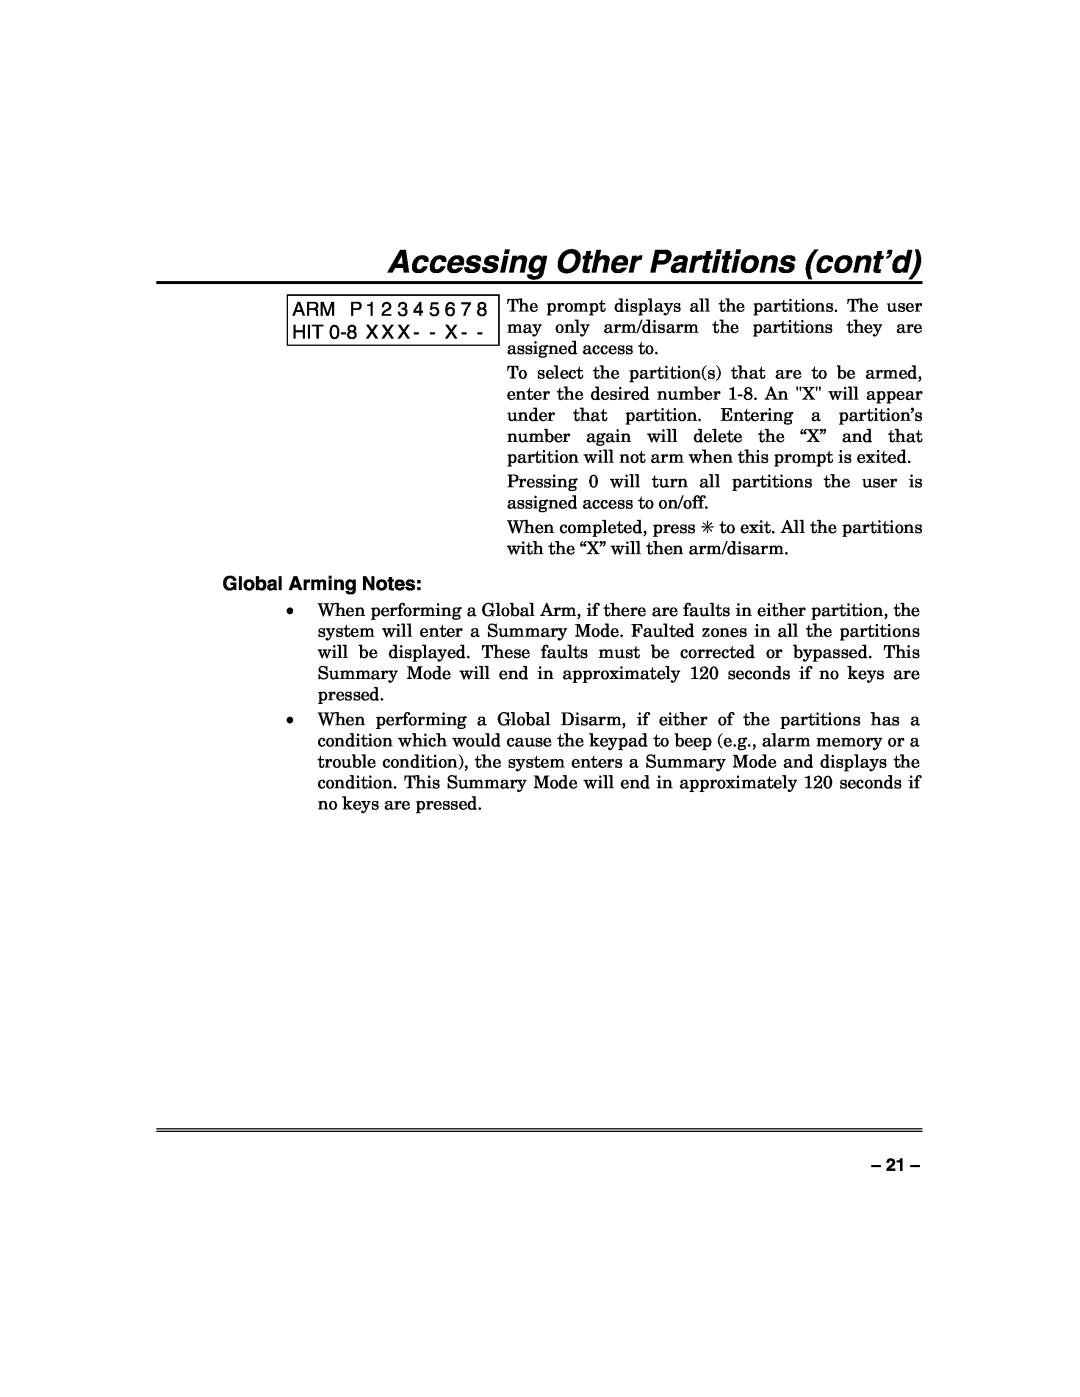 Honeywell N7003V3 manual Accessing Other Partitions cont’d, Global Arming Notes 